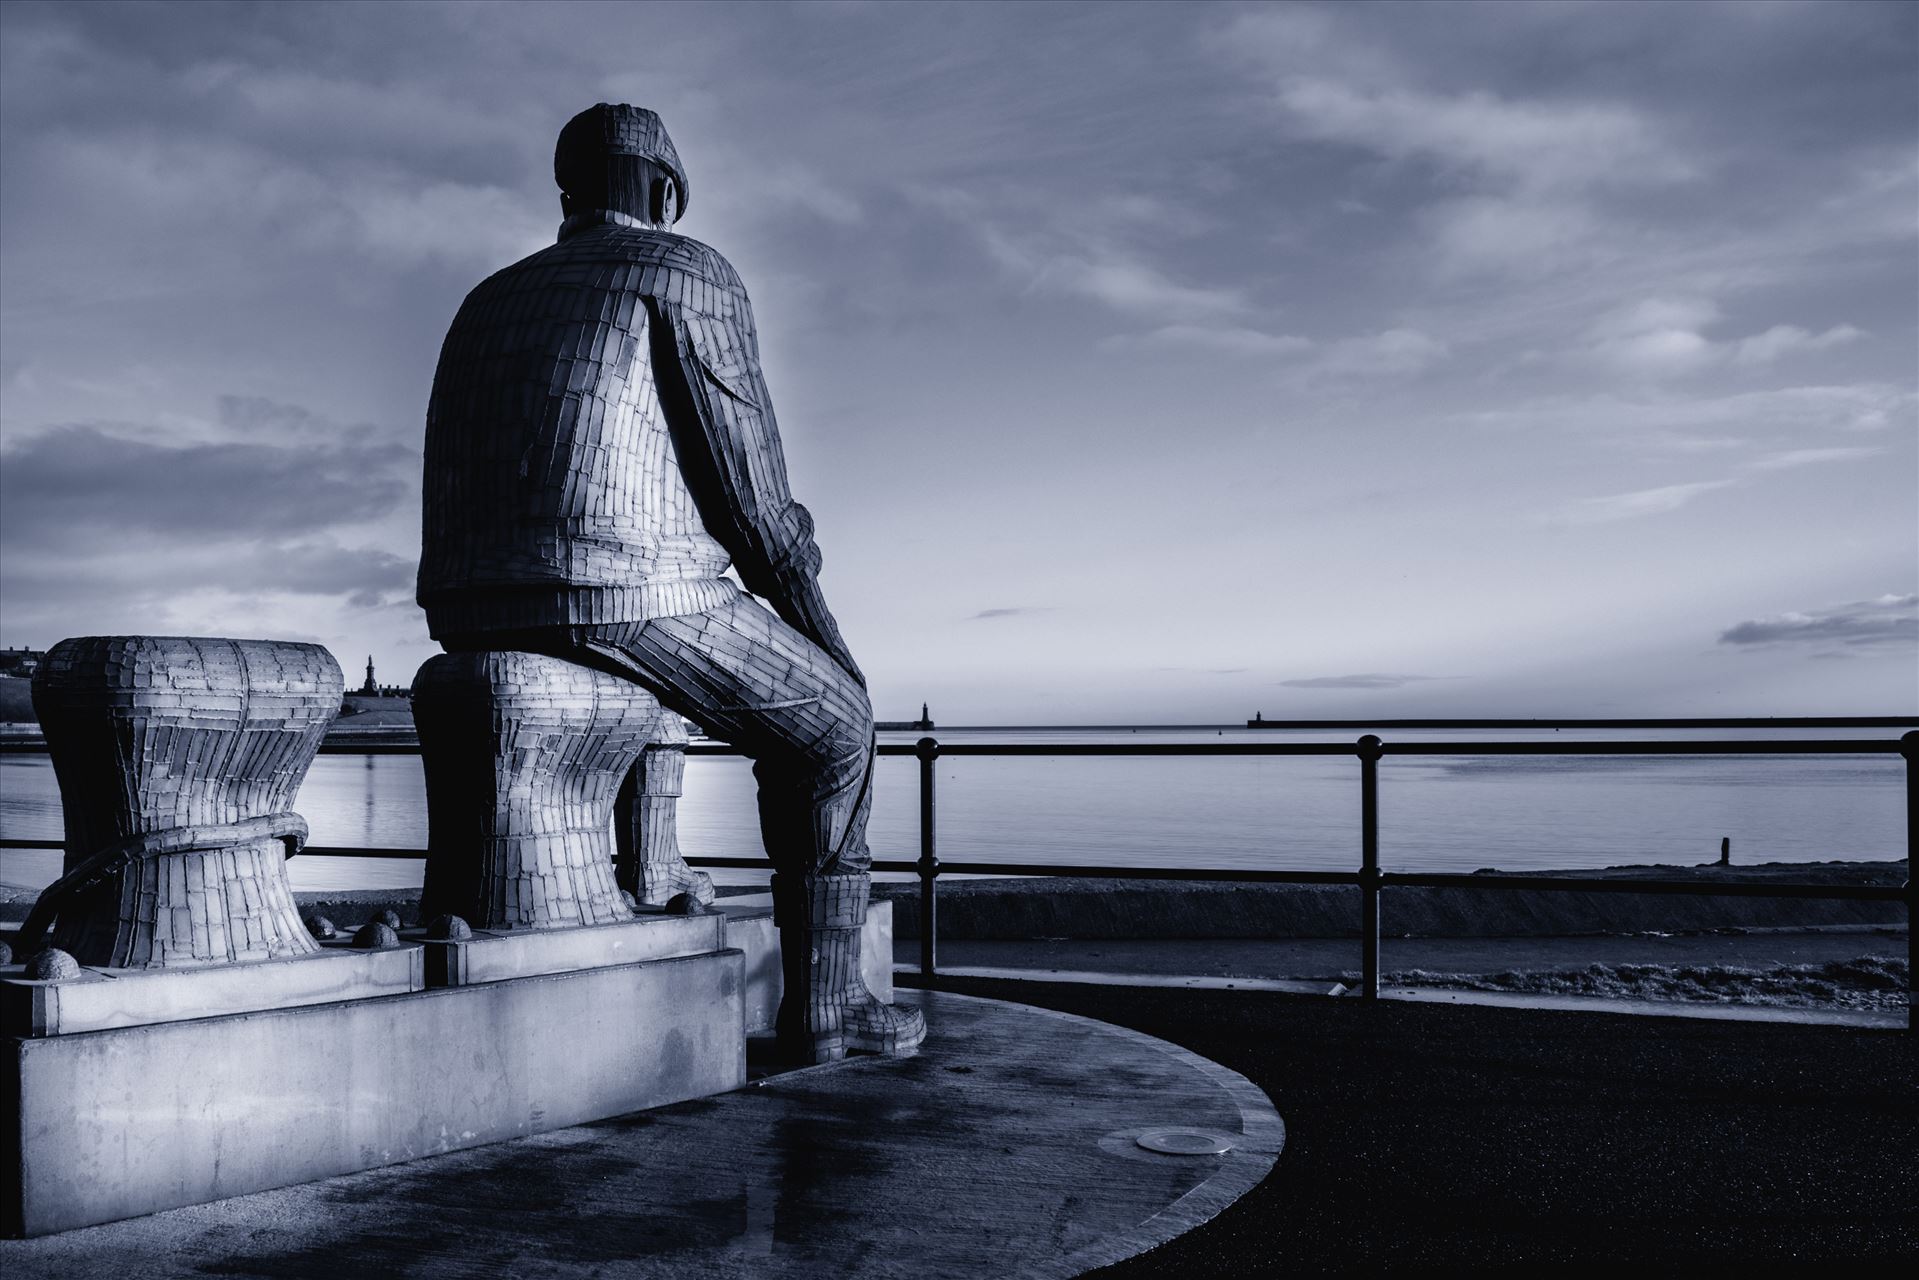 Fiddlers Green The impressive sculpture,  by local artist Ray Lonsdale, named Fiddler’s Green, stands 10ft 6ins tall and is located near the fish quay in North Shields. The memorial is in honour of those fishermen who died doing their job after leaving the port. by philreay